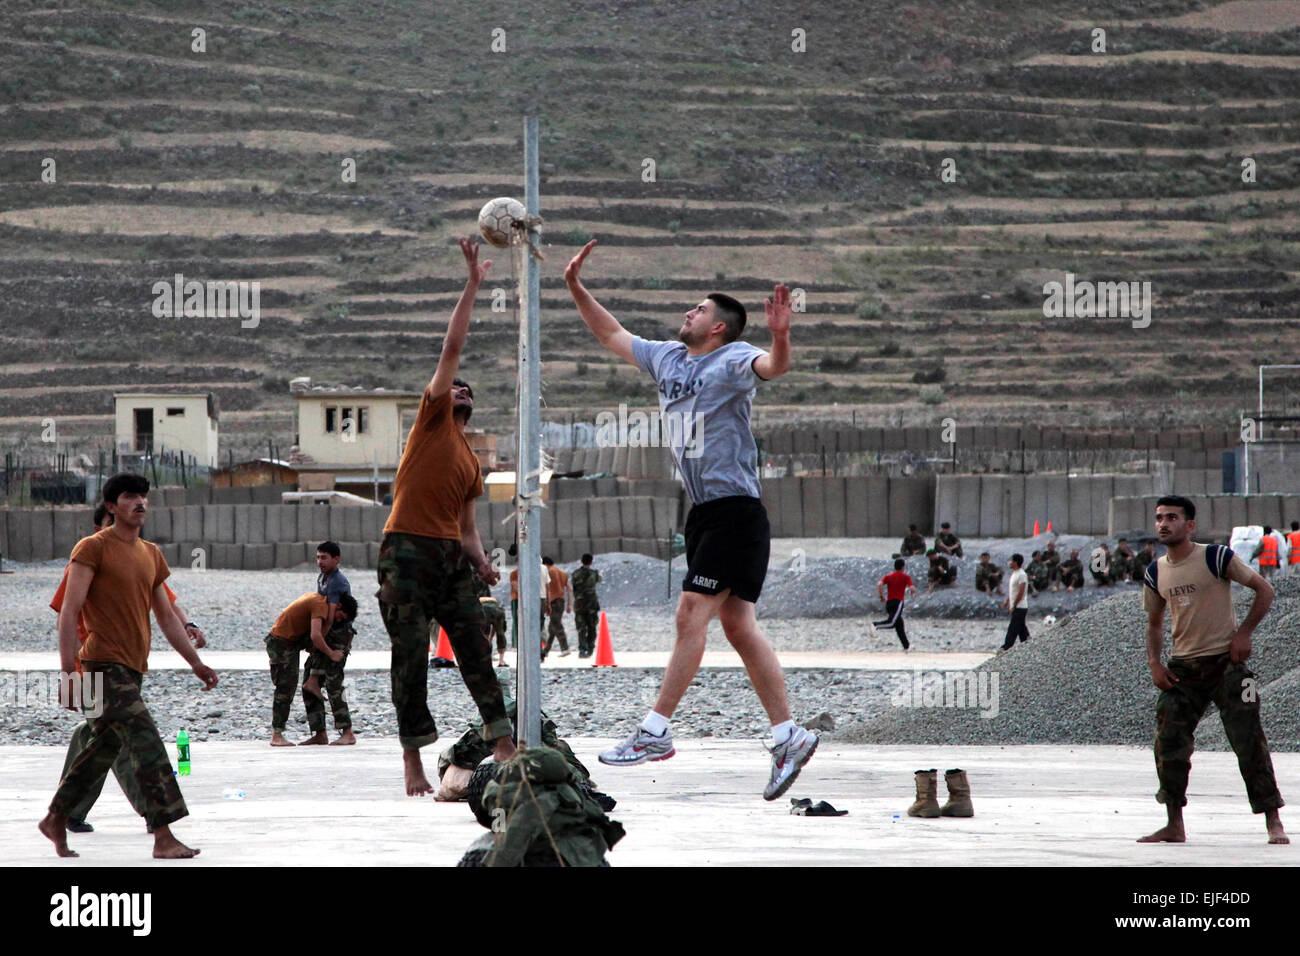 A group of U.S. and Afghan National Security Forces team up to play a game of volleyball at Forward Operating Base Bostick in Kunar province, Afghanistan, July 6. The Soldiers and civilians at the FOB often play sports such as volleyball, soccer and cricket together to build a stronger cohesion.  Staff Sgt. Christopher W. Allison. Stock Photo